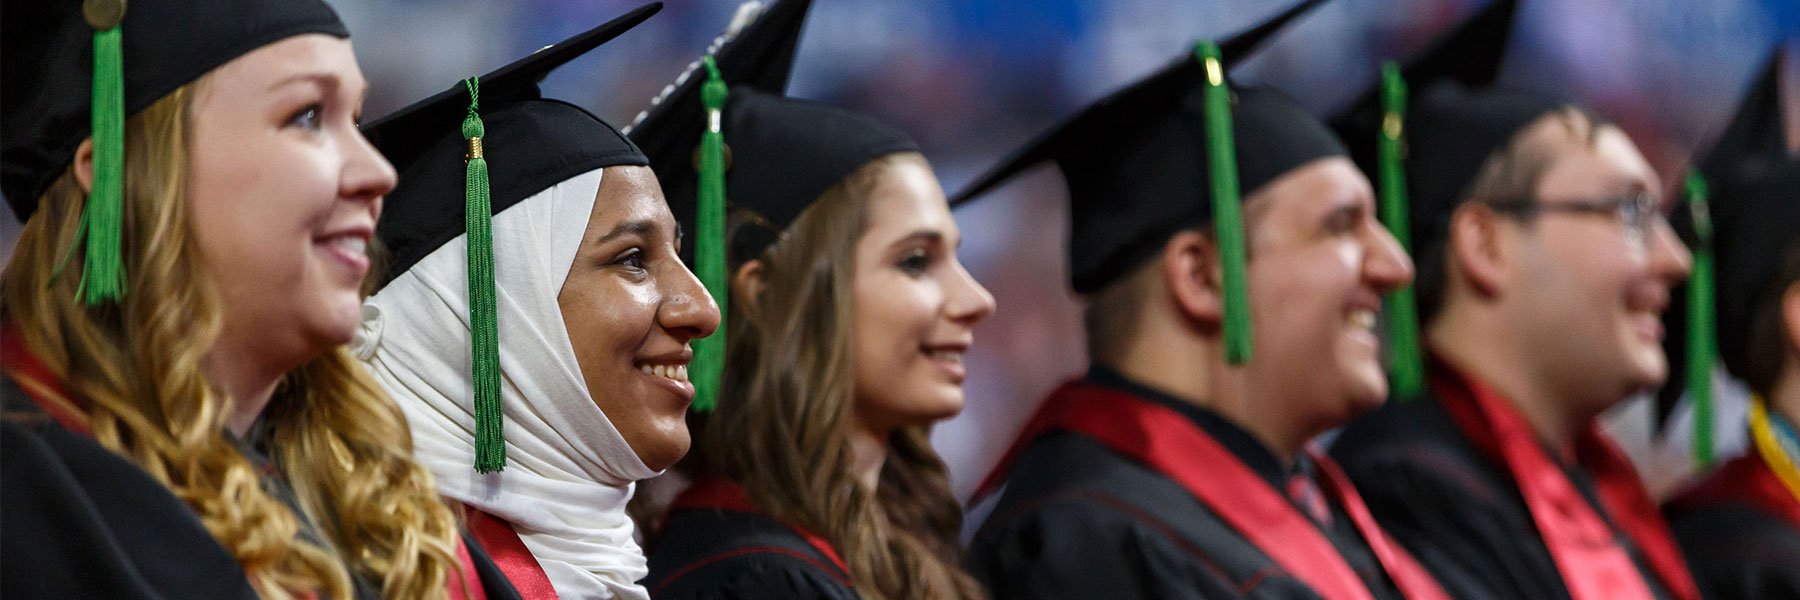 Profile view of a row of four students at IUPUI Graduation.